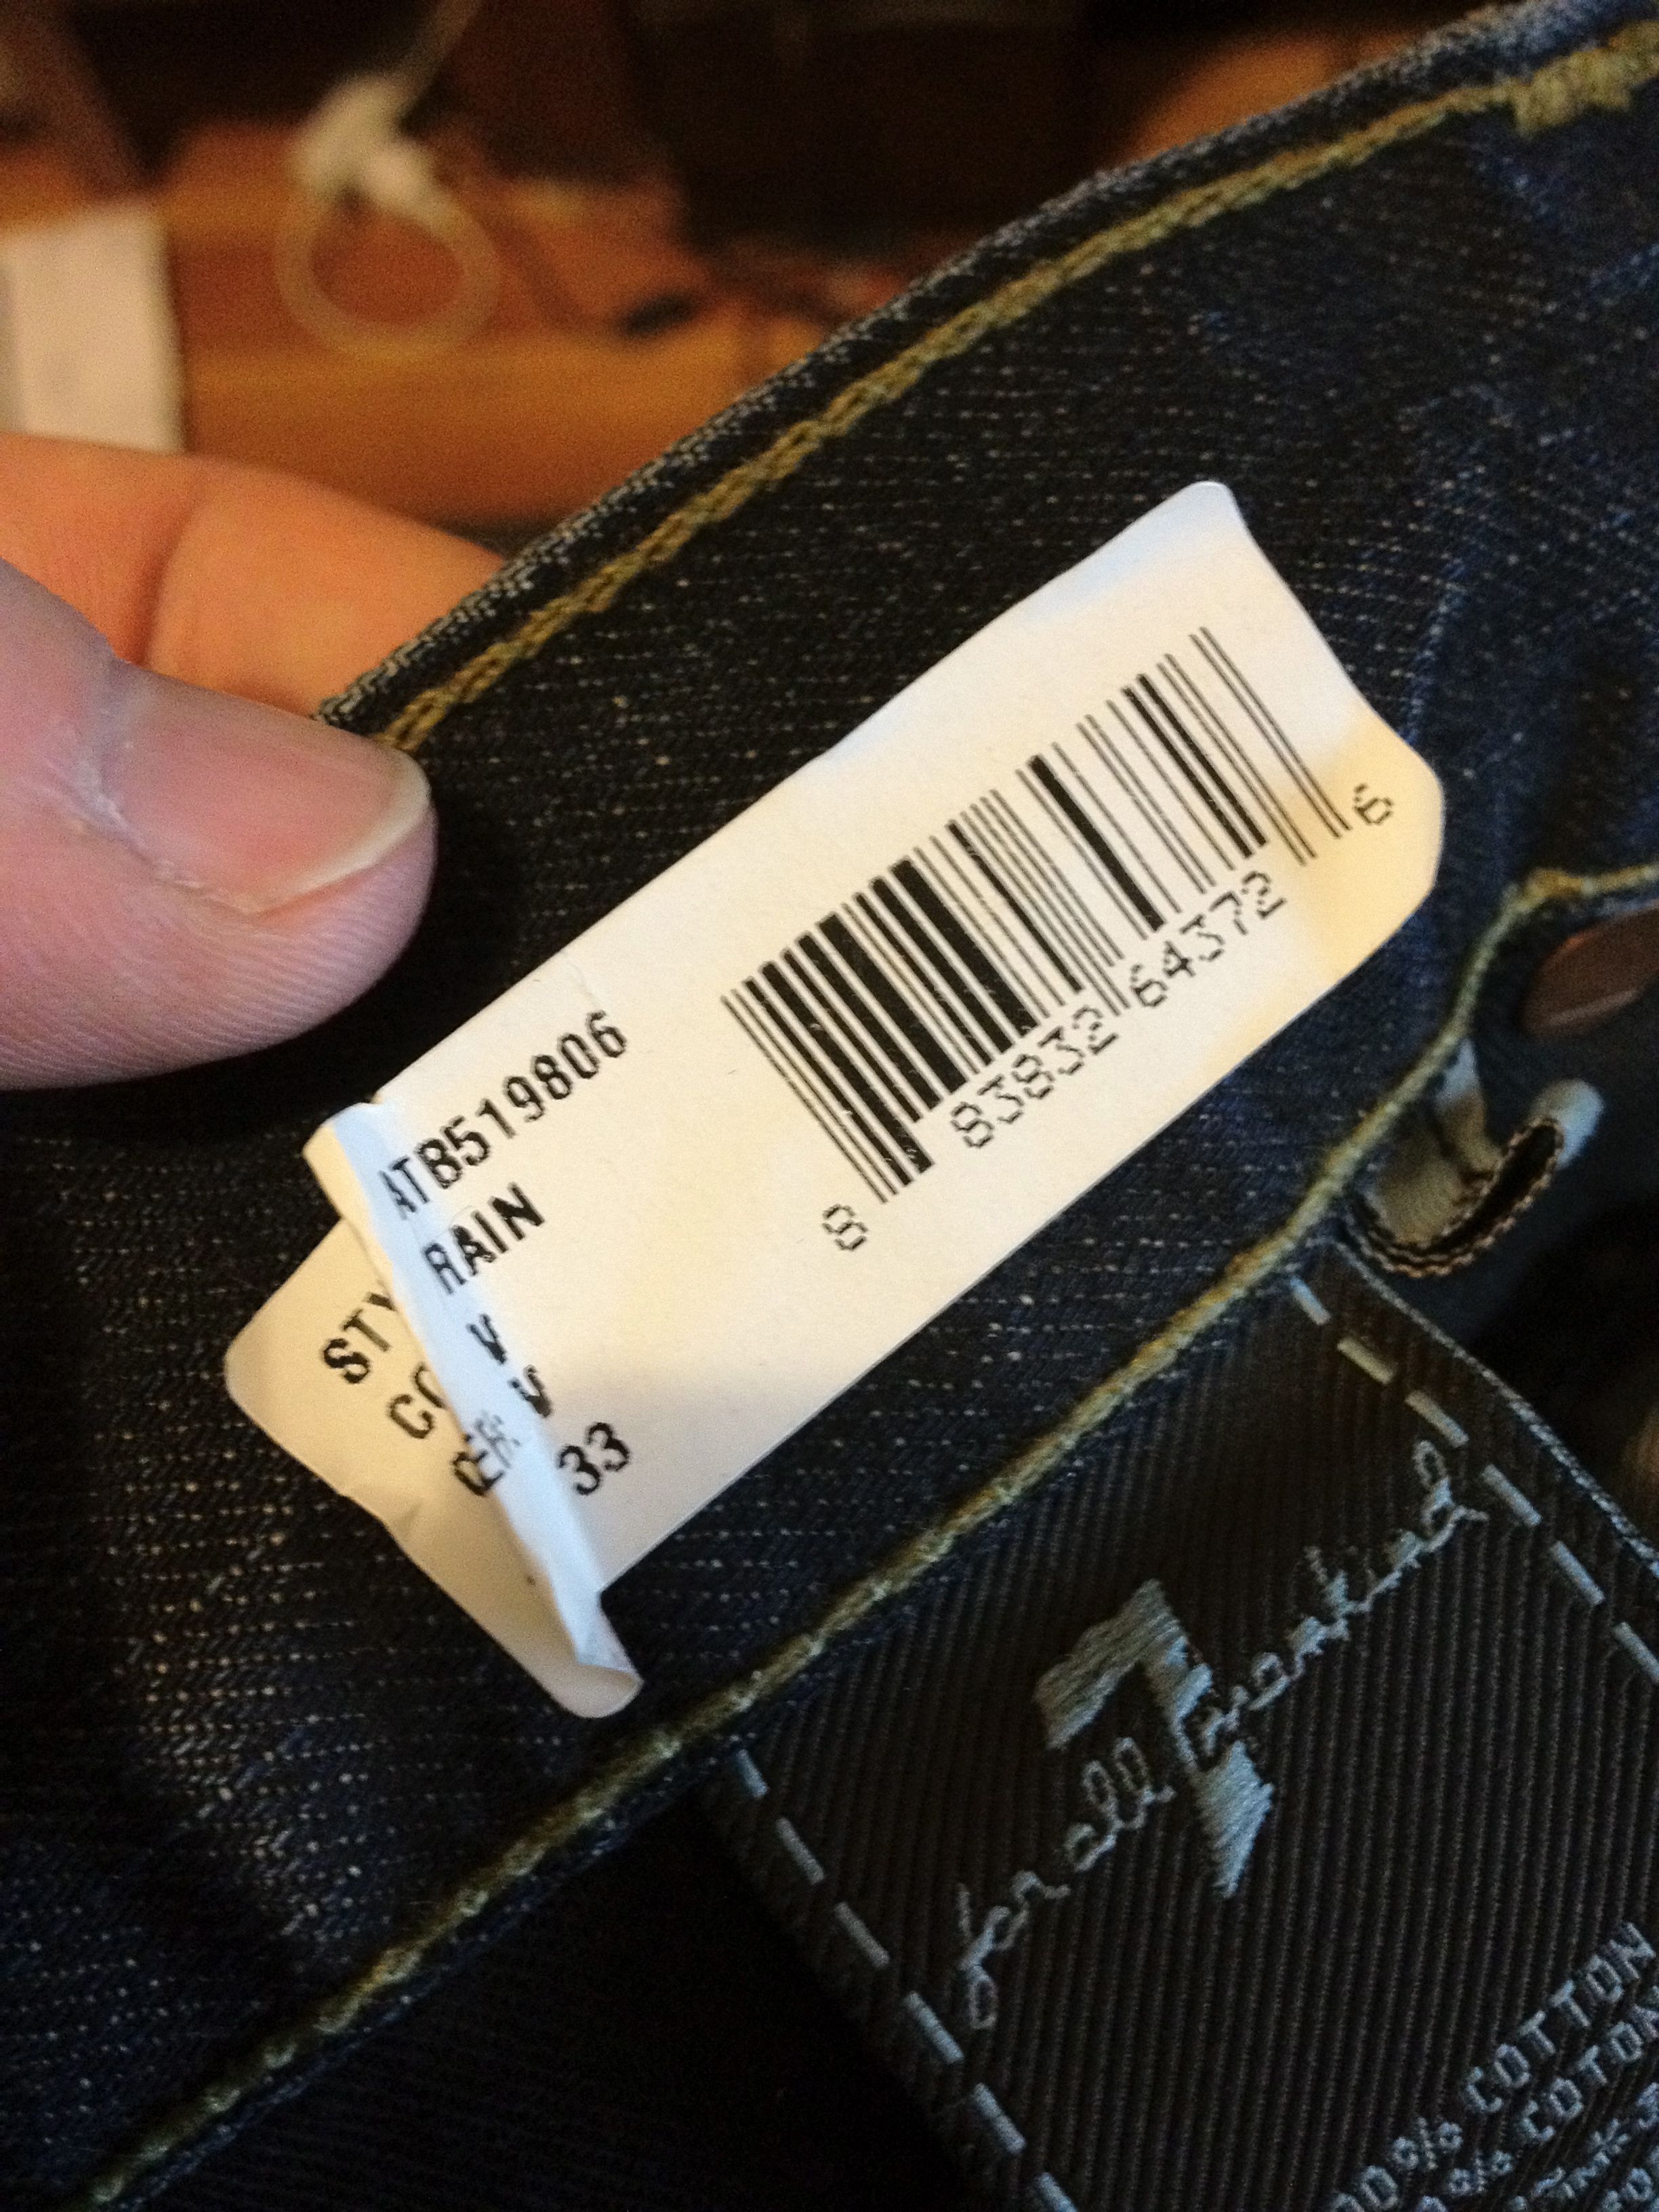 Did Gilt sell me counterfeit 7 for all mankind? | Styleforum